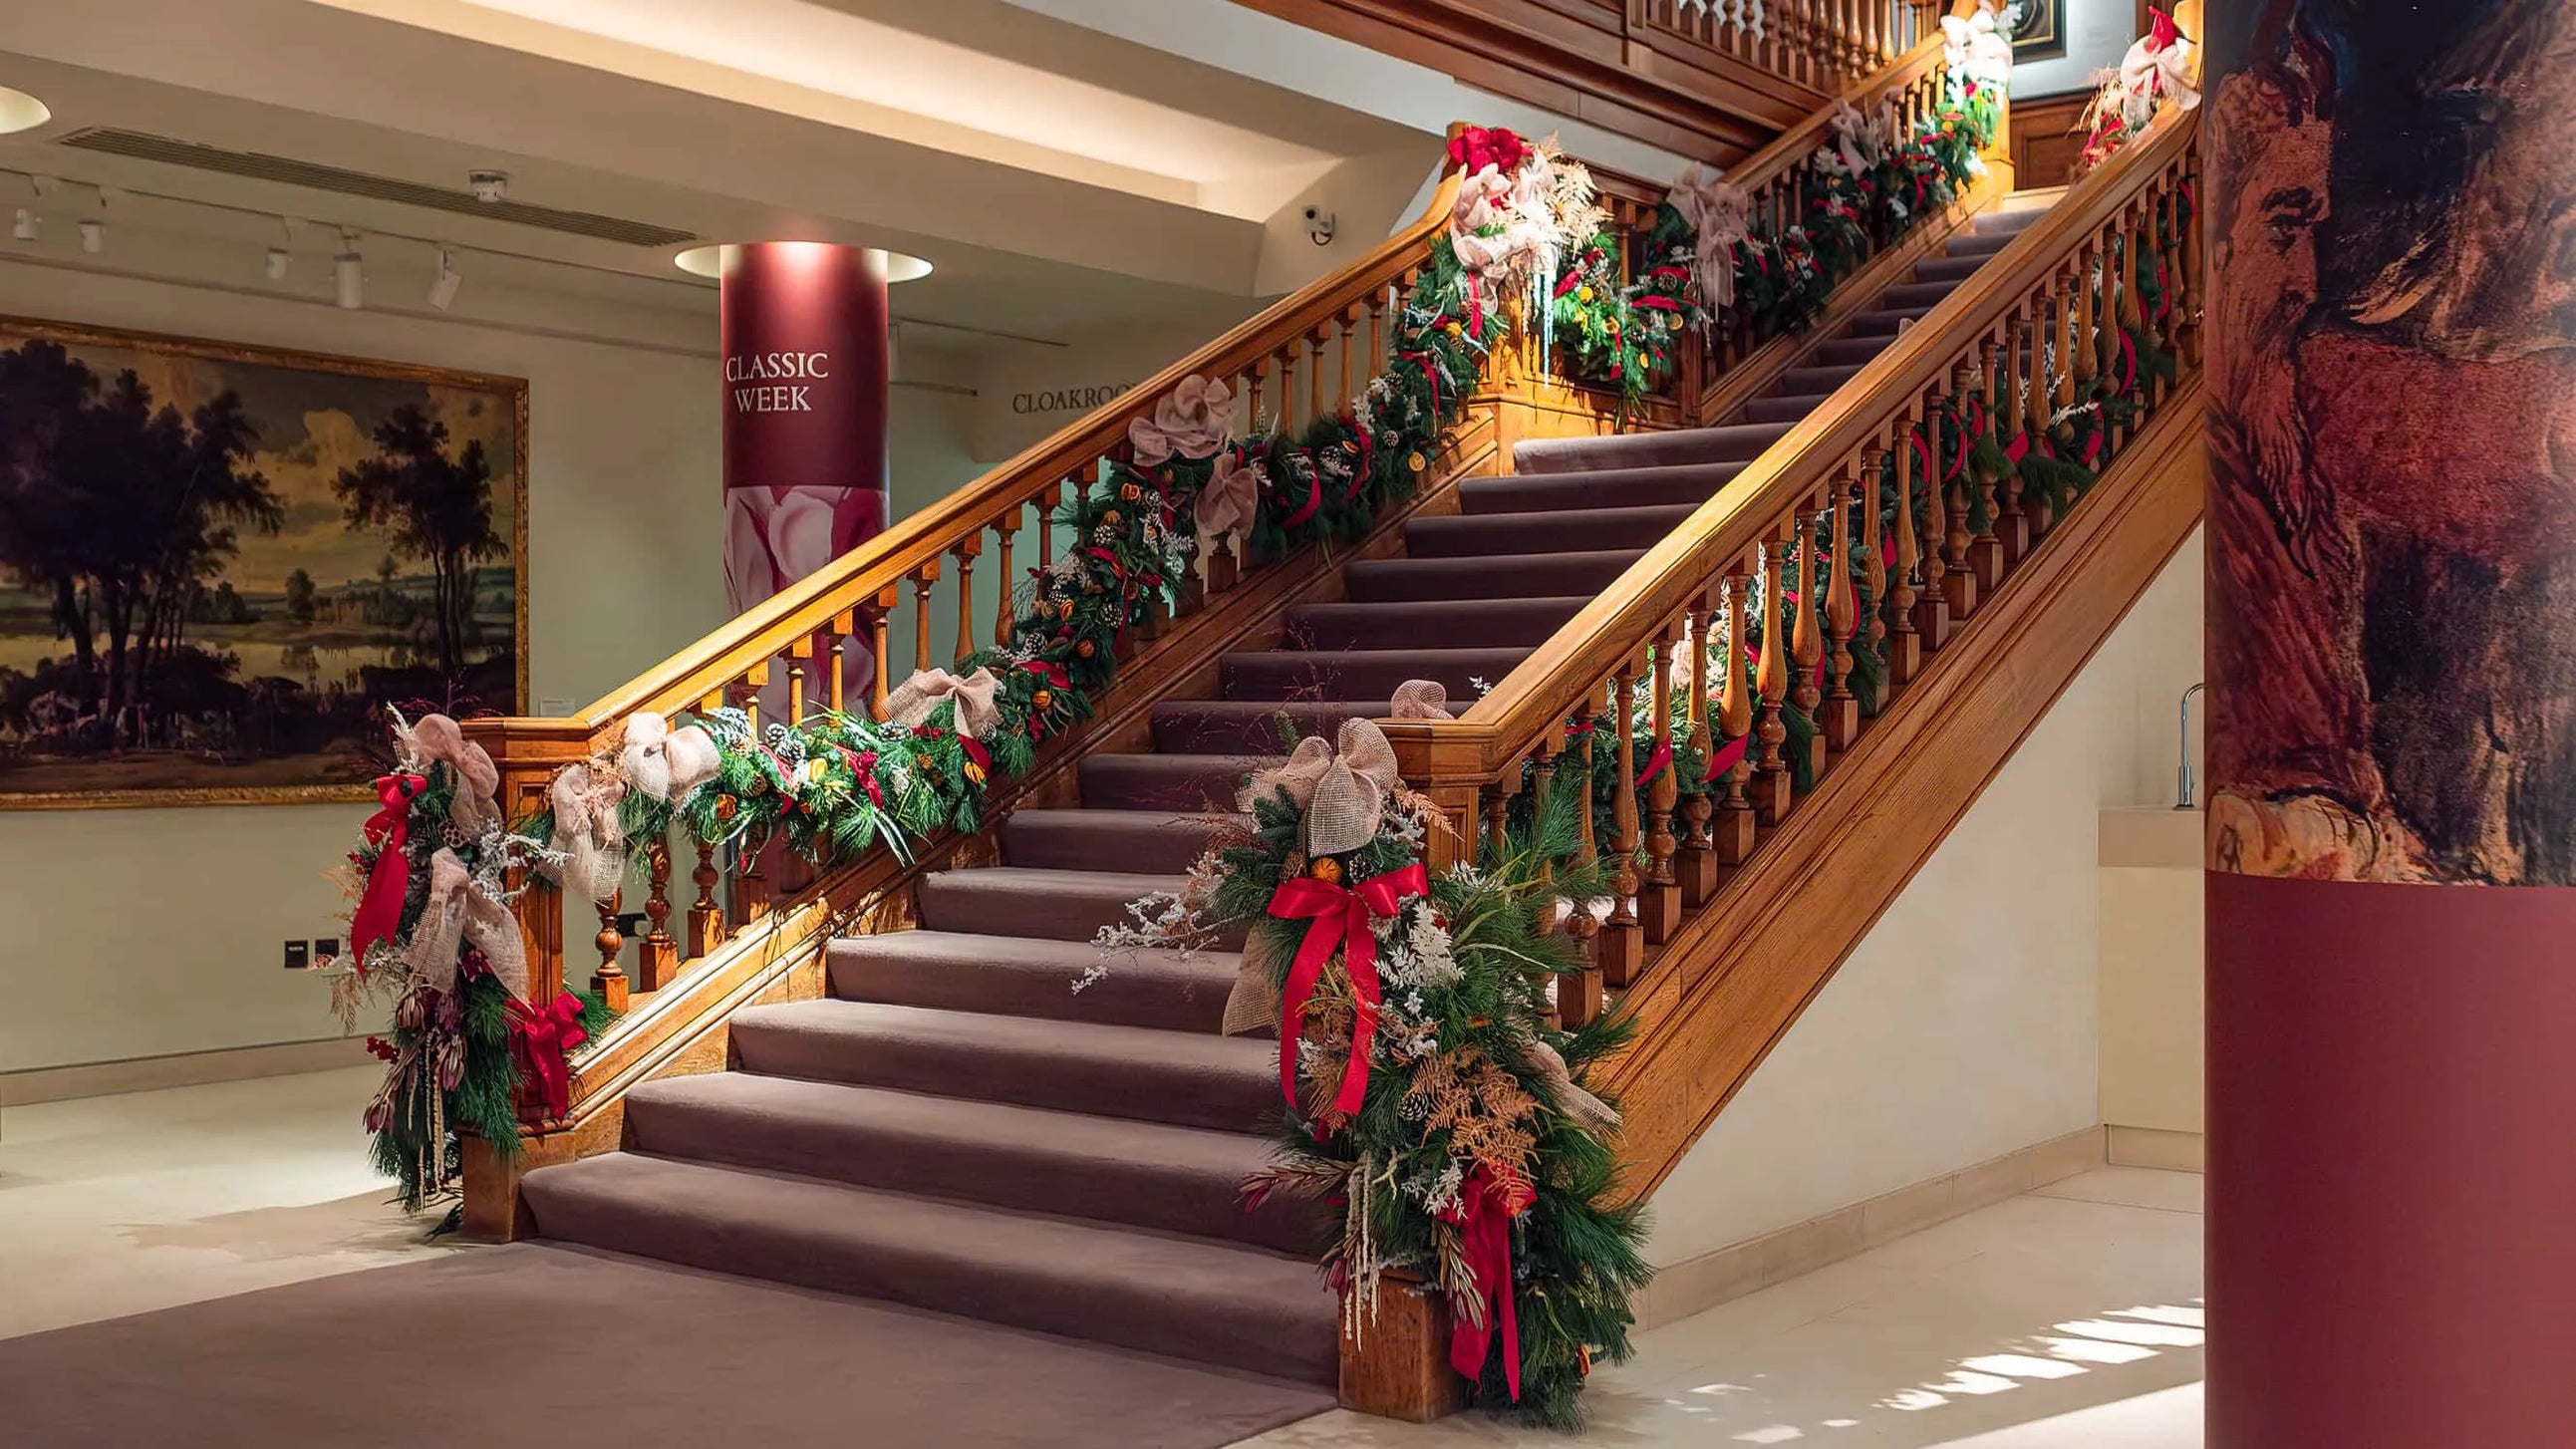 Our Cascading Christmas Flowers, a combination of seasonal reds and lush greenery gracefully adorn this wide wooden staircase, creating an elegant and timeless floral spectacle.